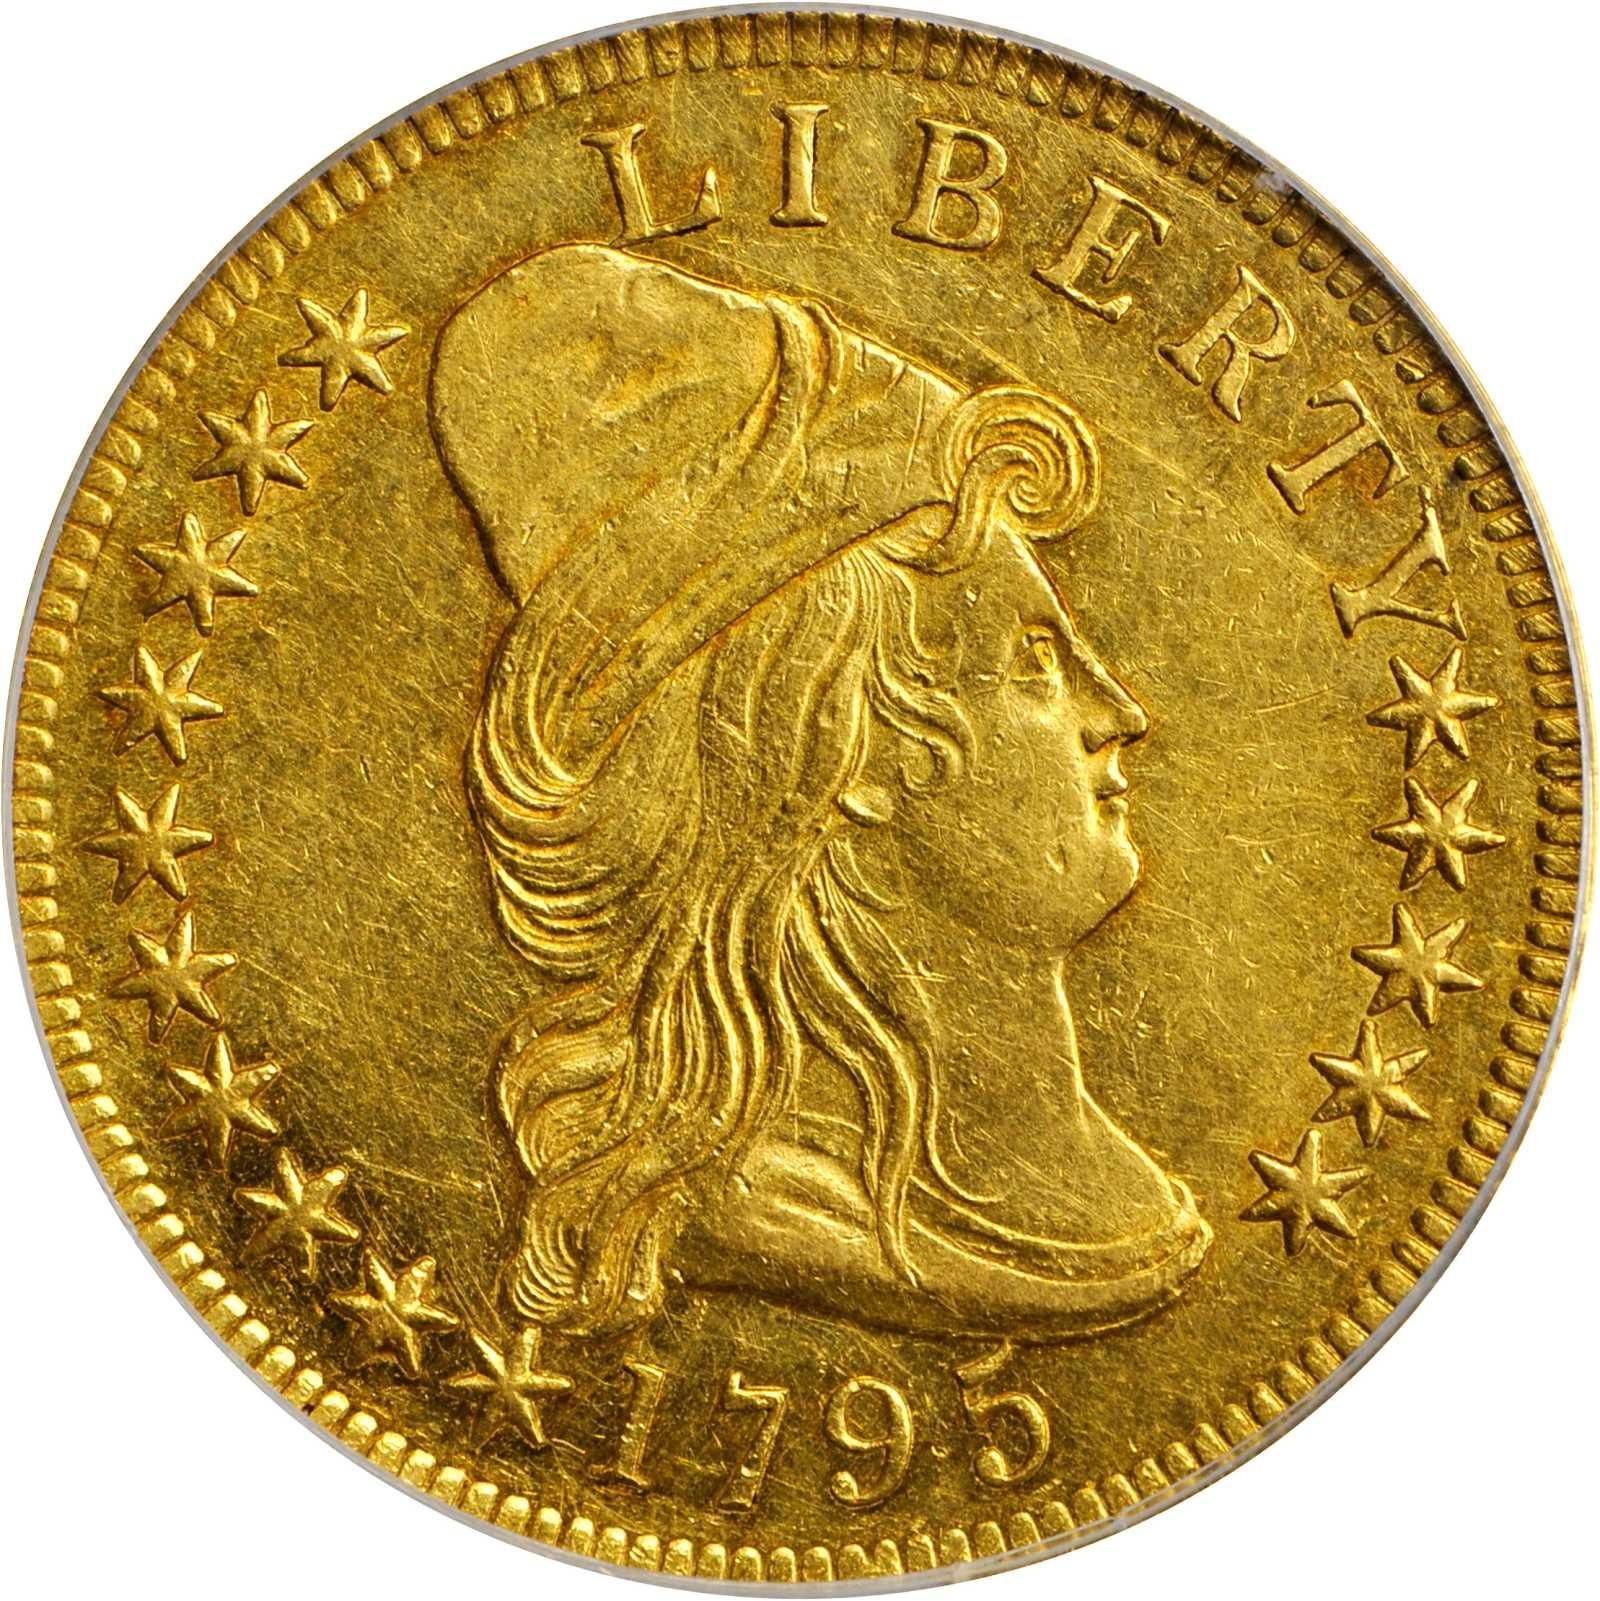 Historic 1795 Capped Bust Right Eagle